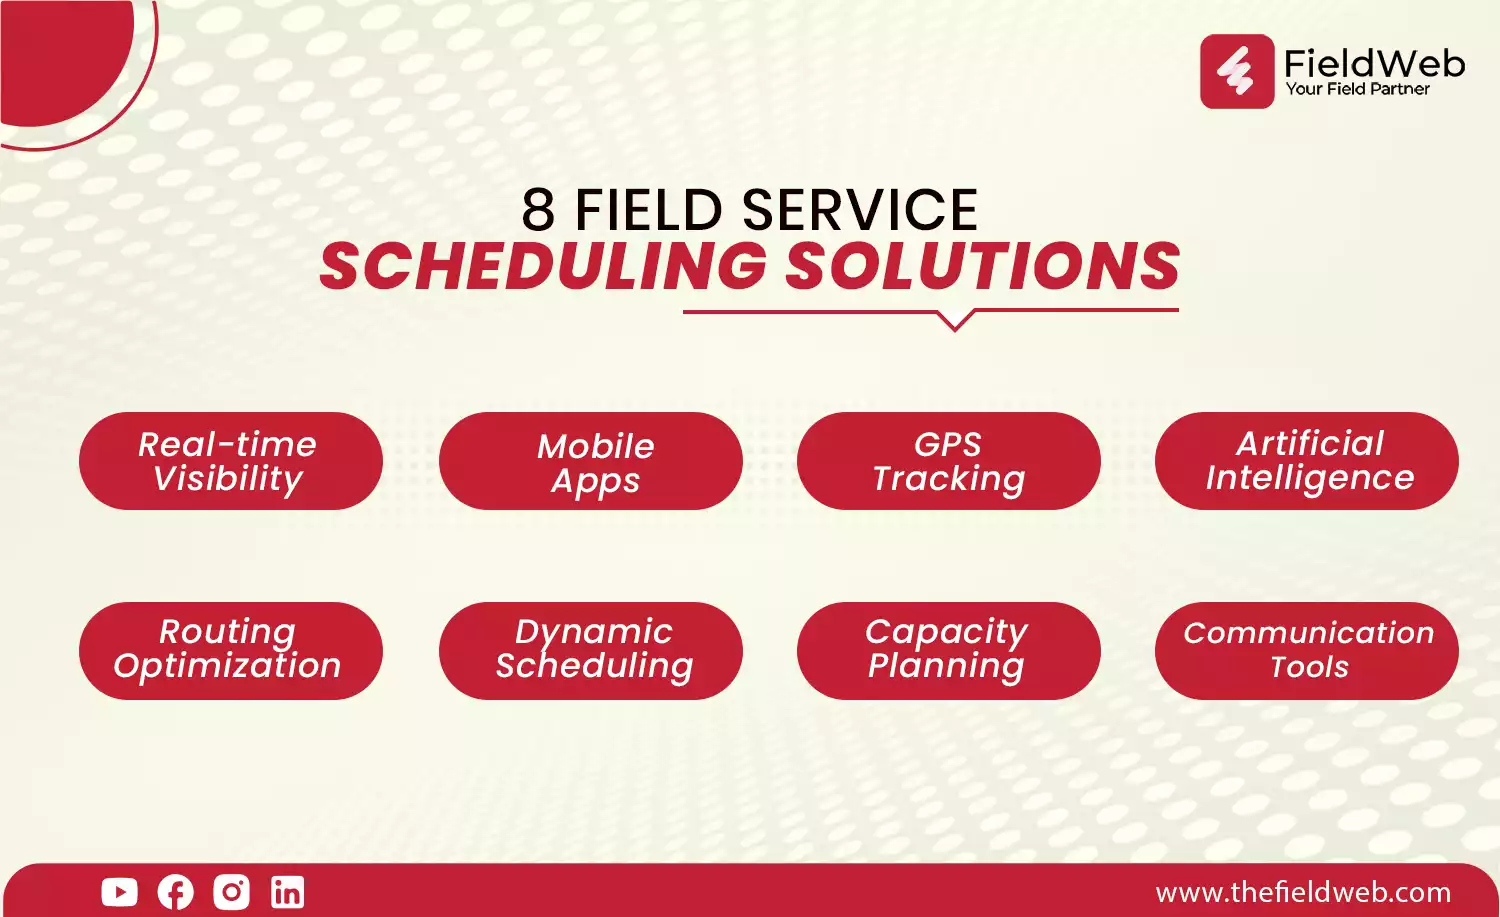 image is displaying 8 solutions of field service scheduling